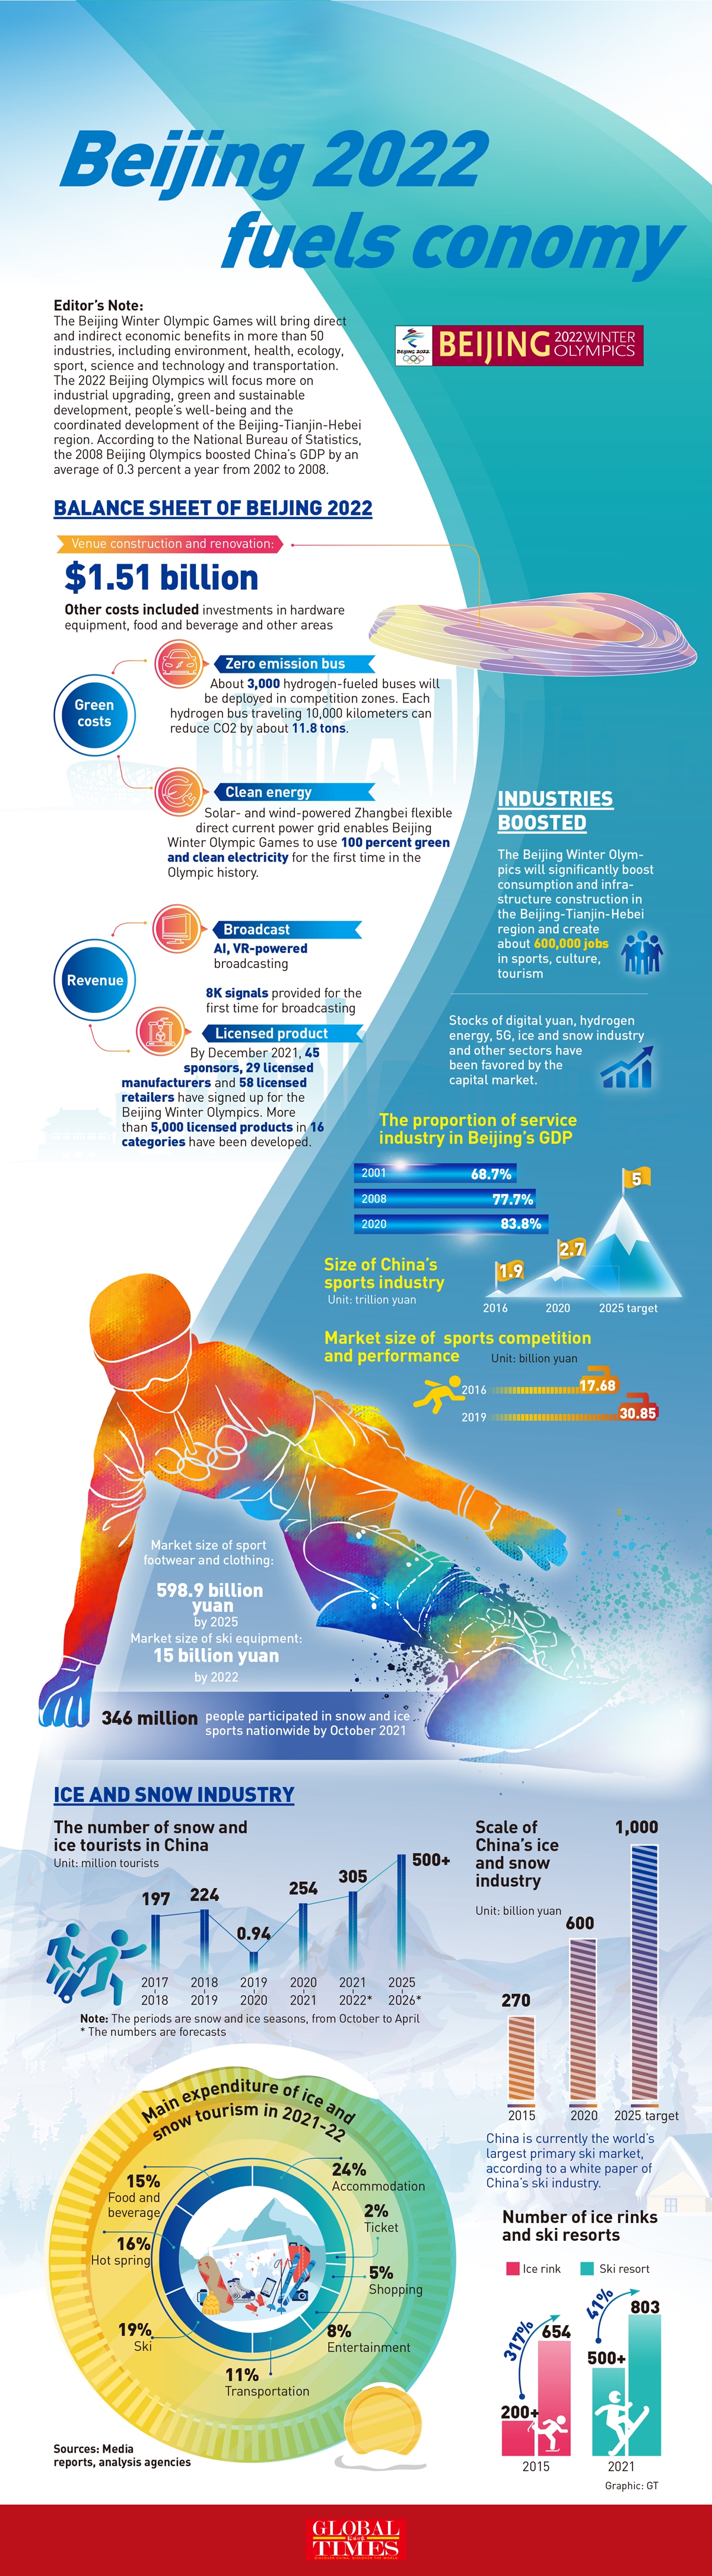 Beijing 2022 Winter Olympic Games fuels economy Infographic: GT